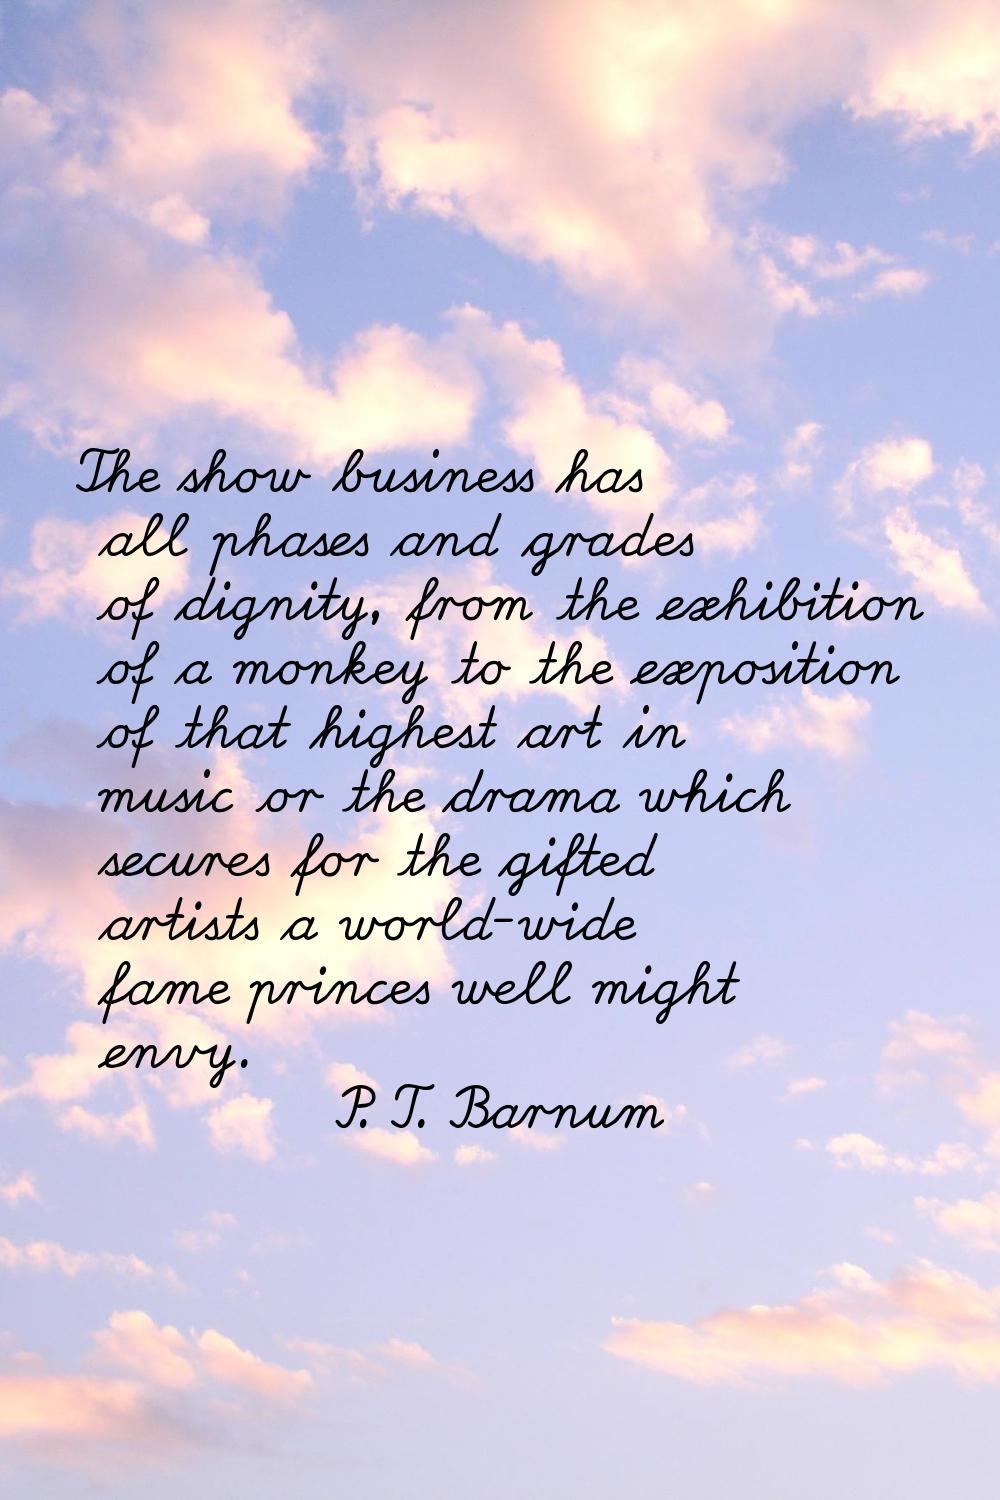 The show business has all phases and grades of dignity, from the exhibition of a monkey to the expo